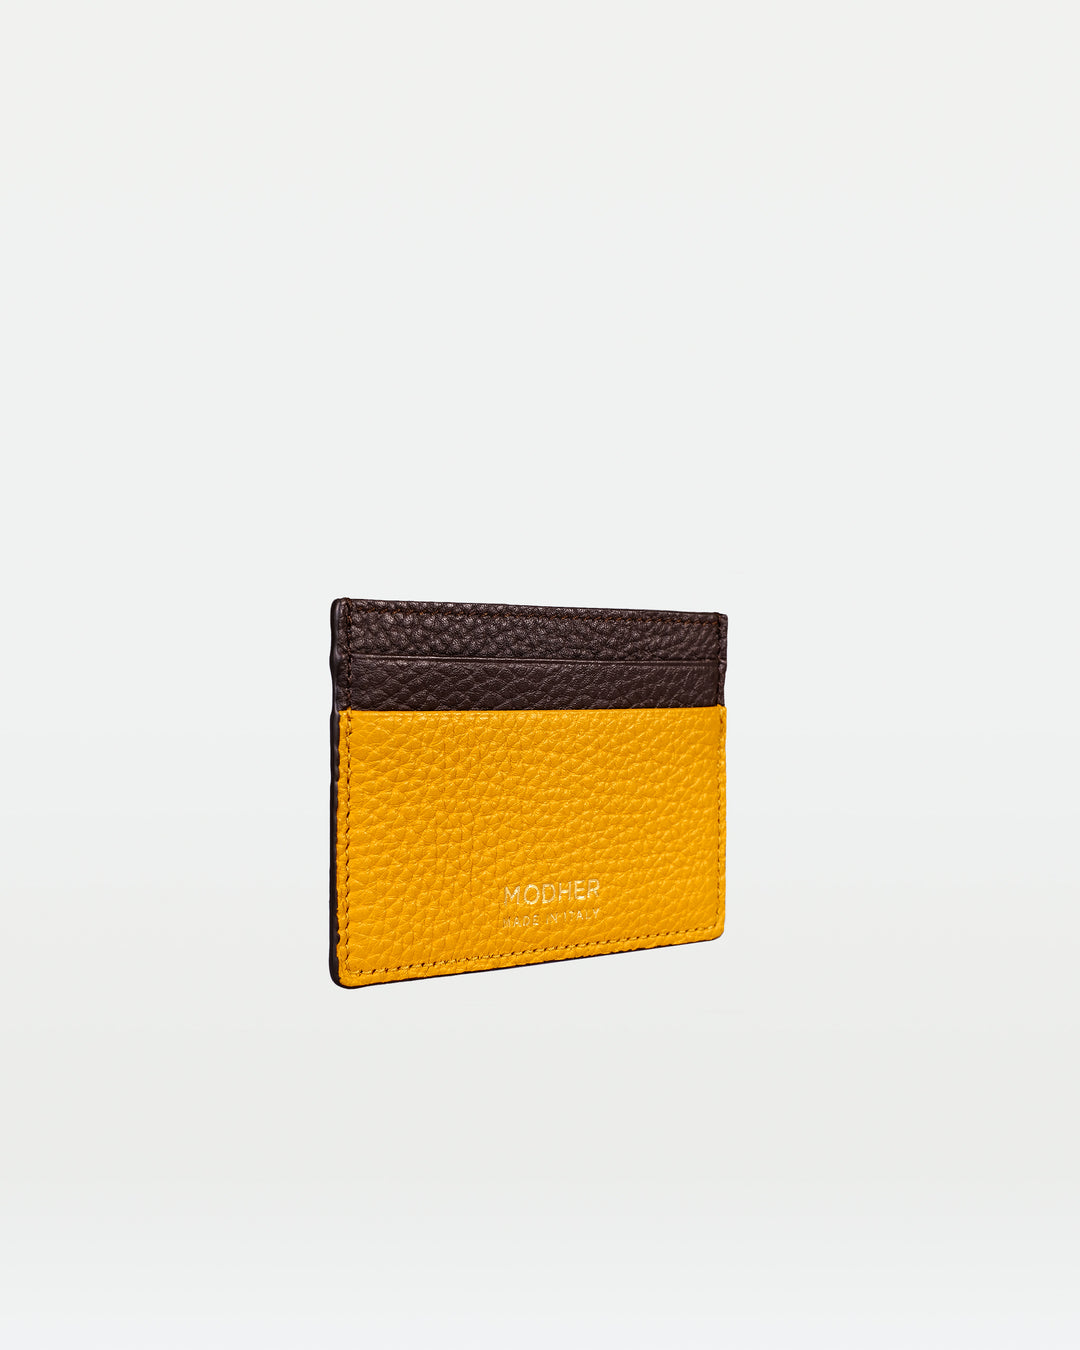 MODHER Leather credit card holder#color_yellow-and-brown